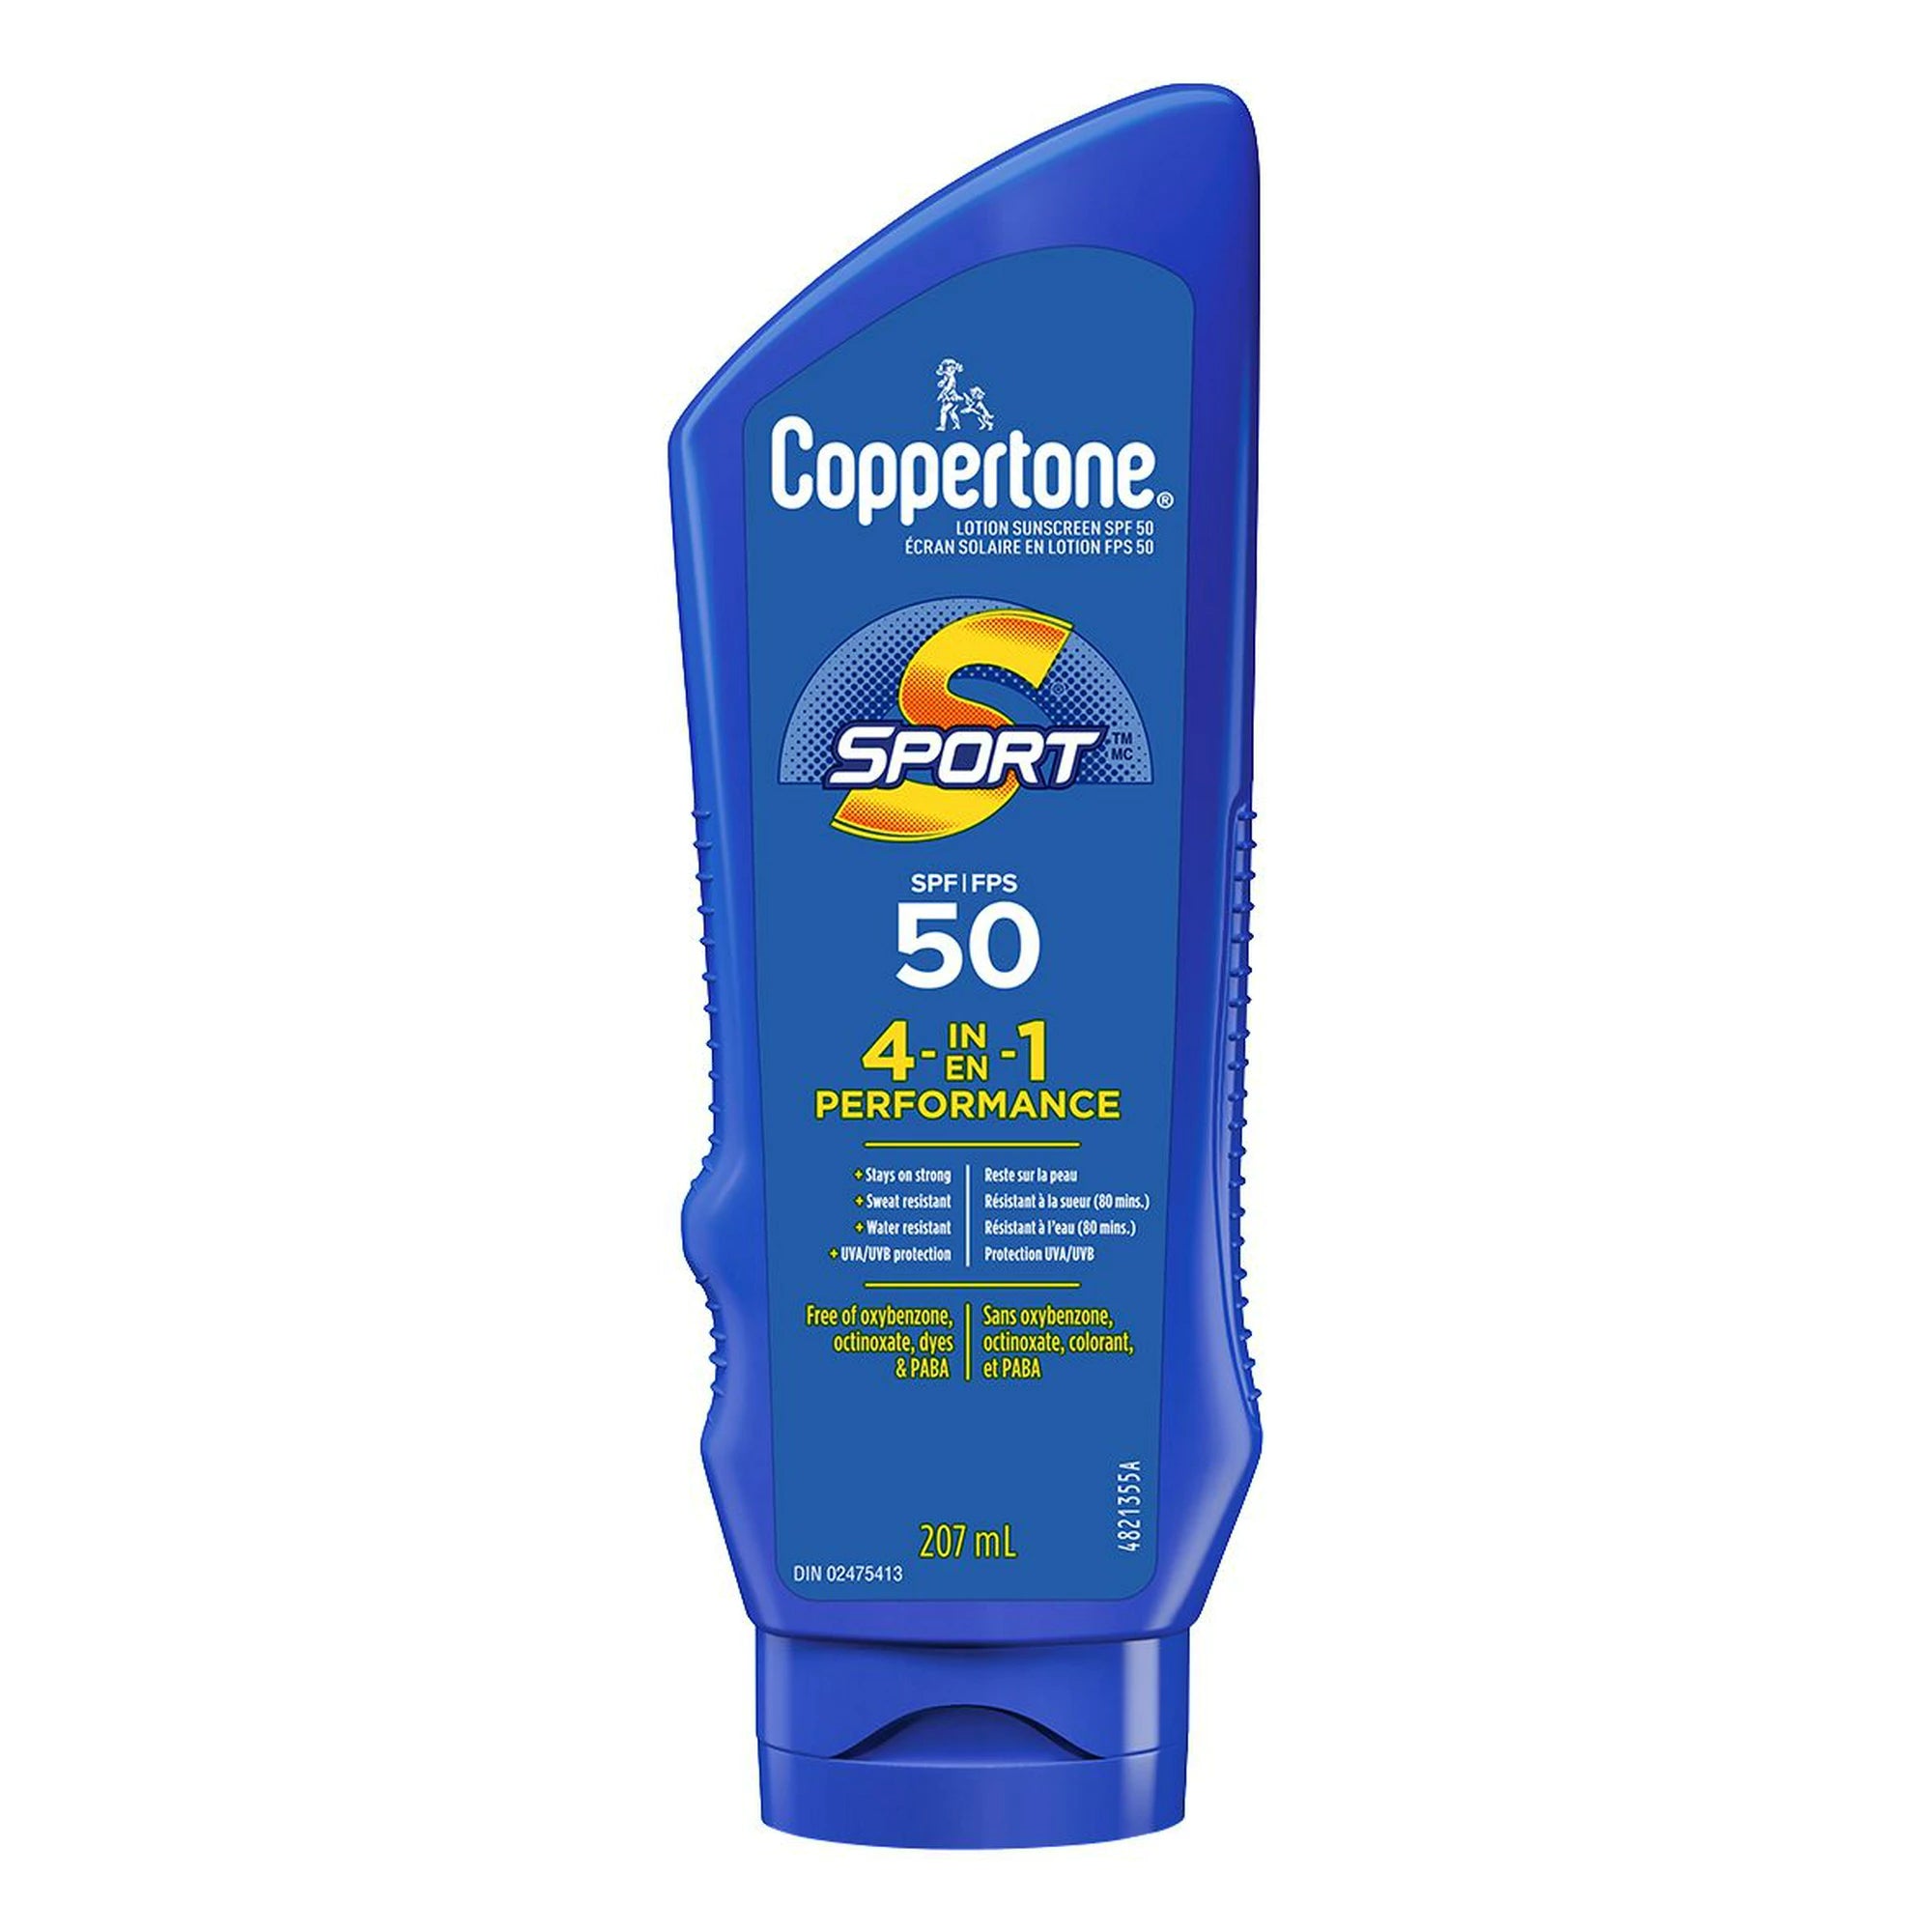 Coppertone Sport Sunscreen Lotion Spf 50, Sweat and water Resistant Body Lotion for Sun Protection, Face Sunscreen for Active Adults, 207 ml.